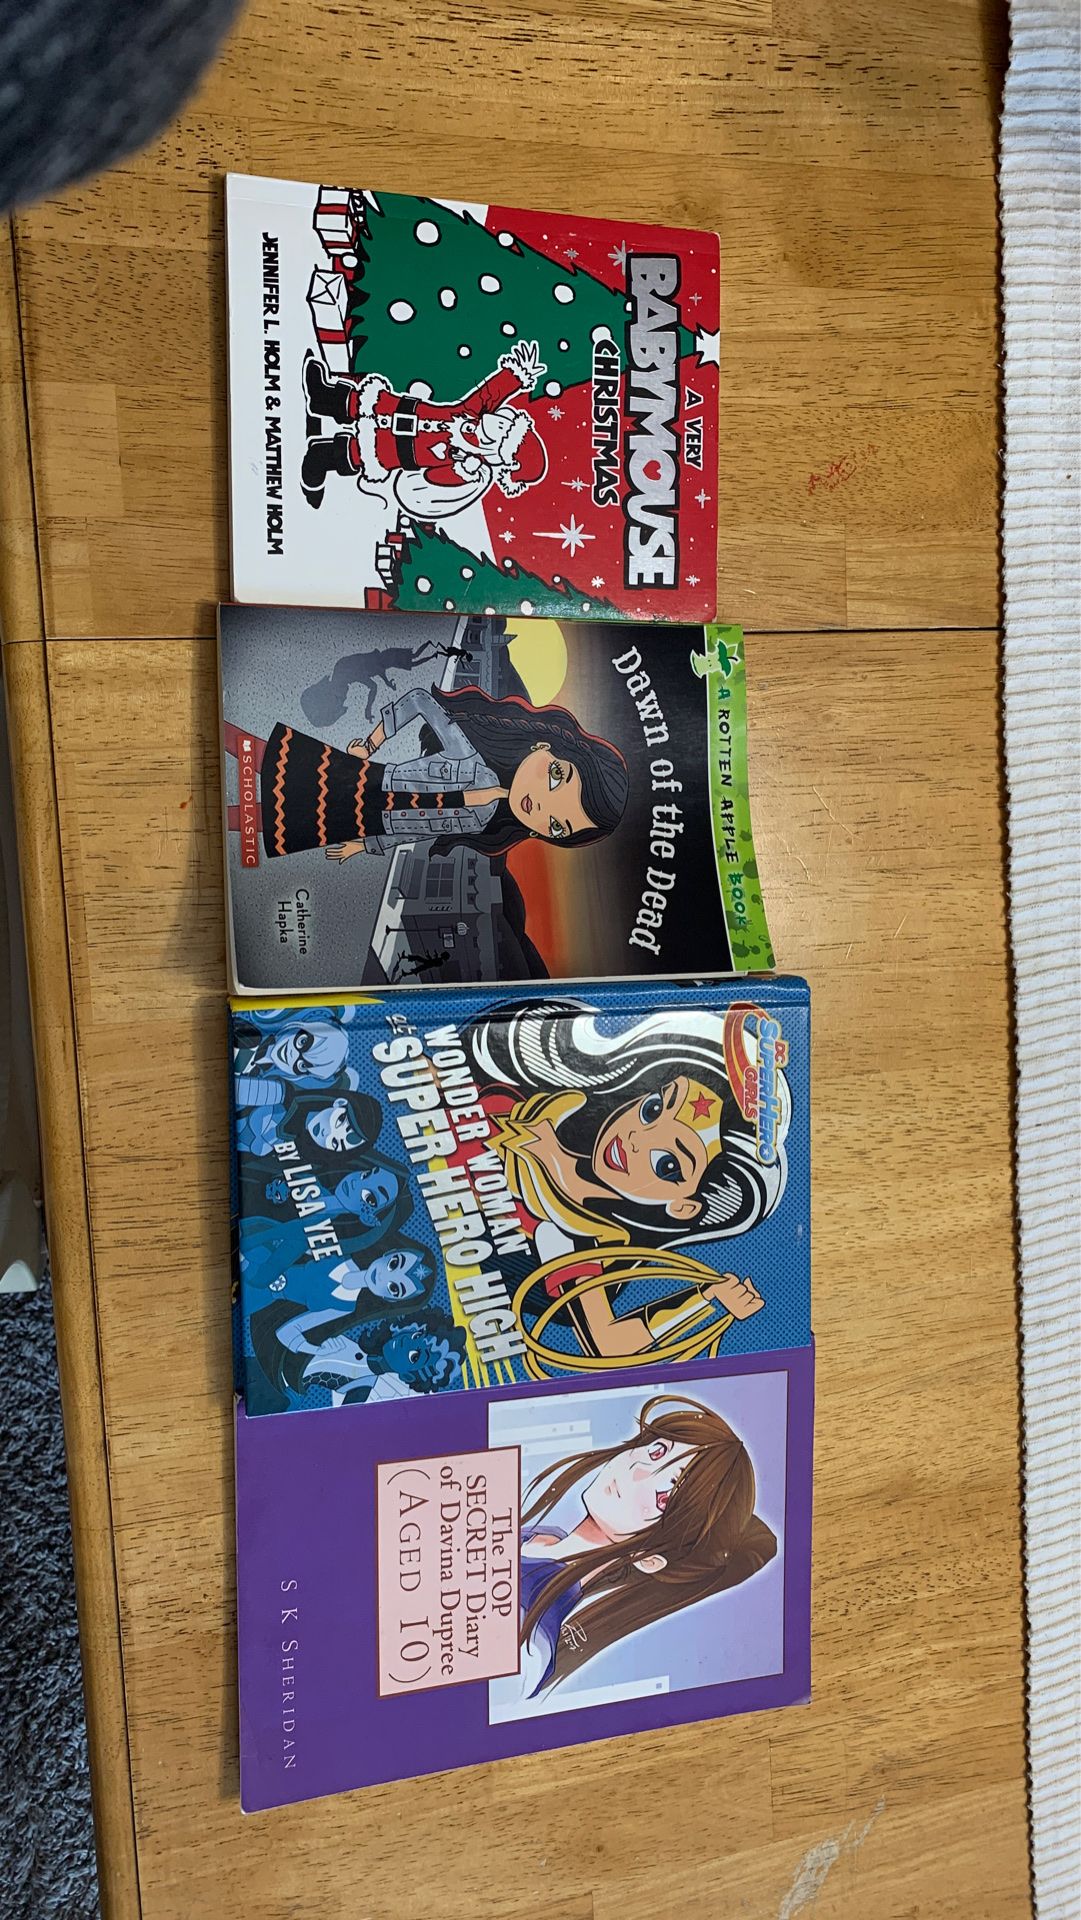 My daughter is selling these books they are all in good condition she has just read them a few times already